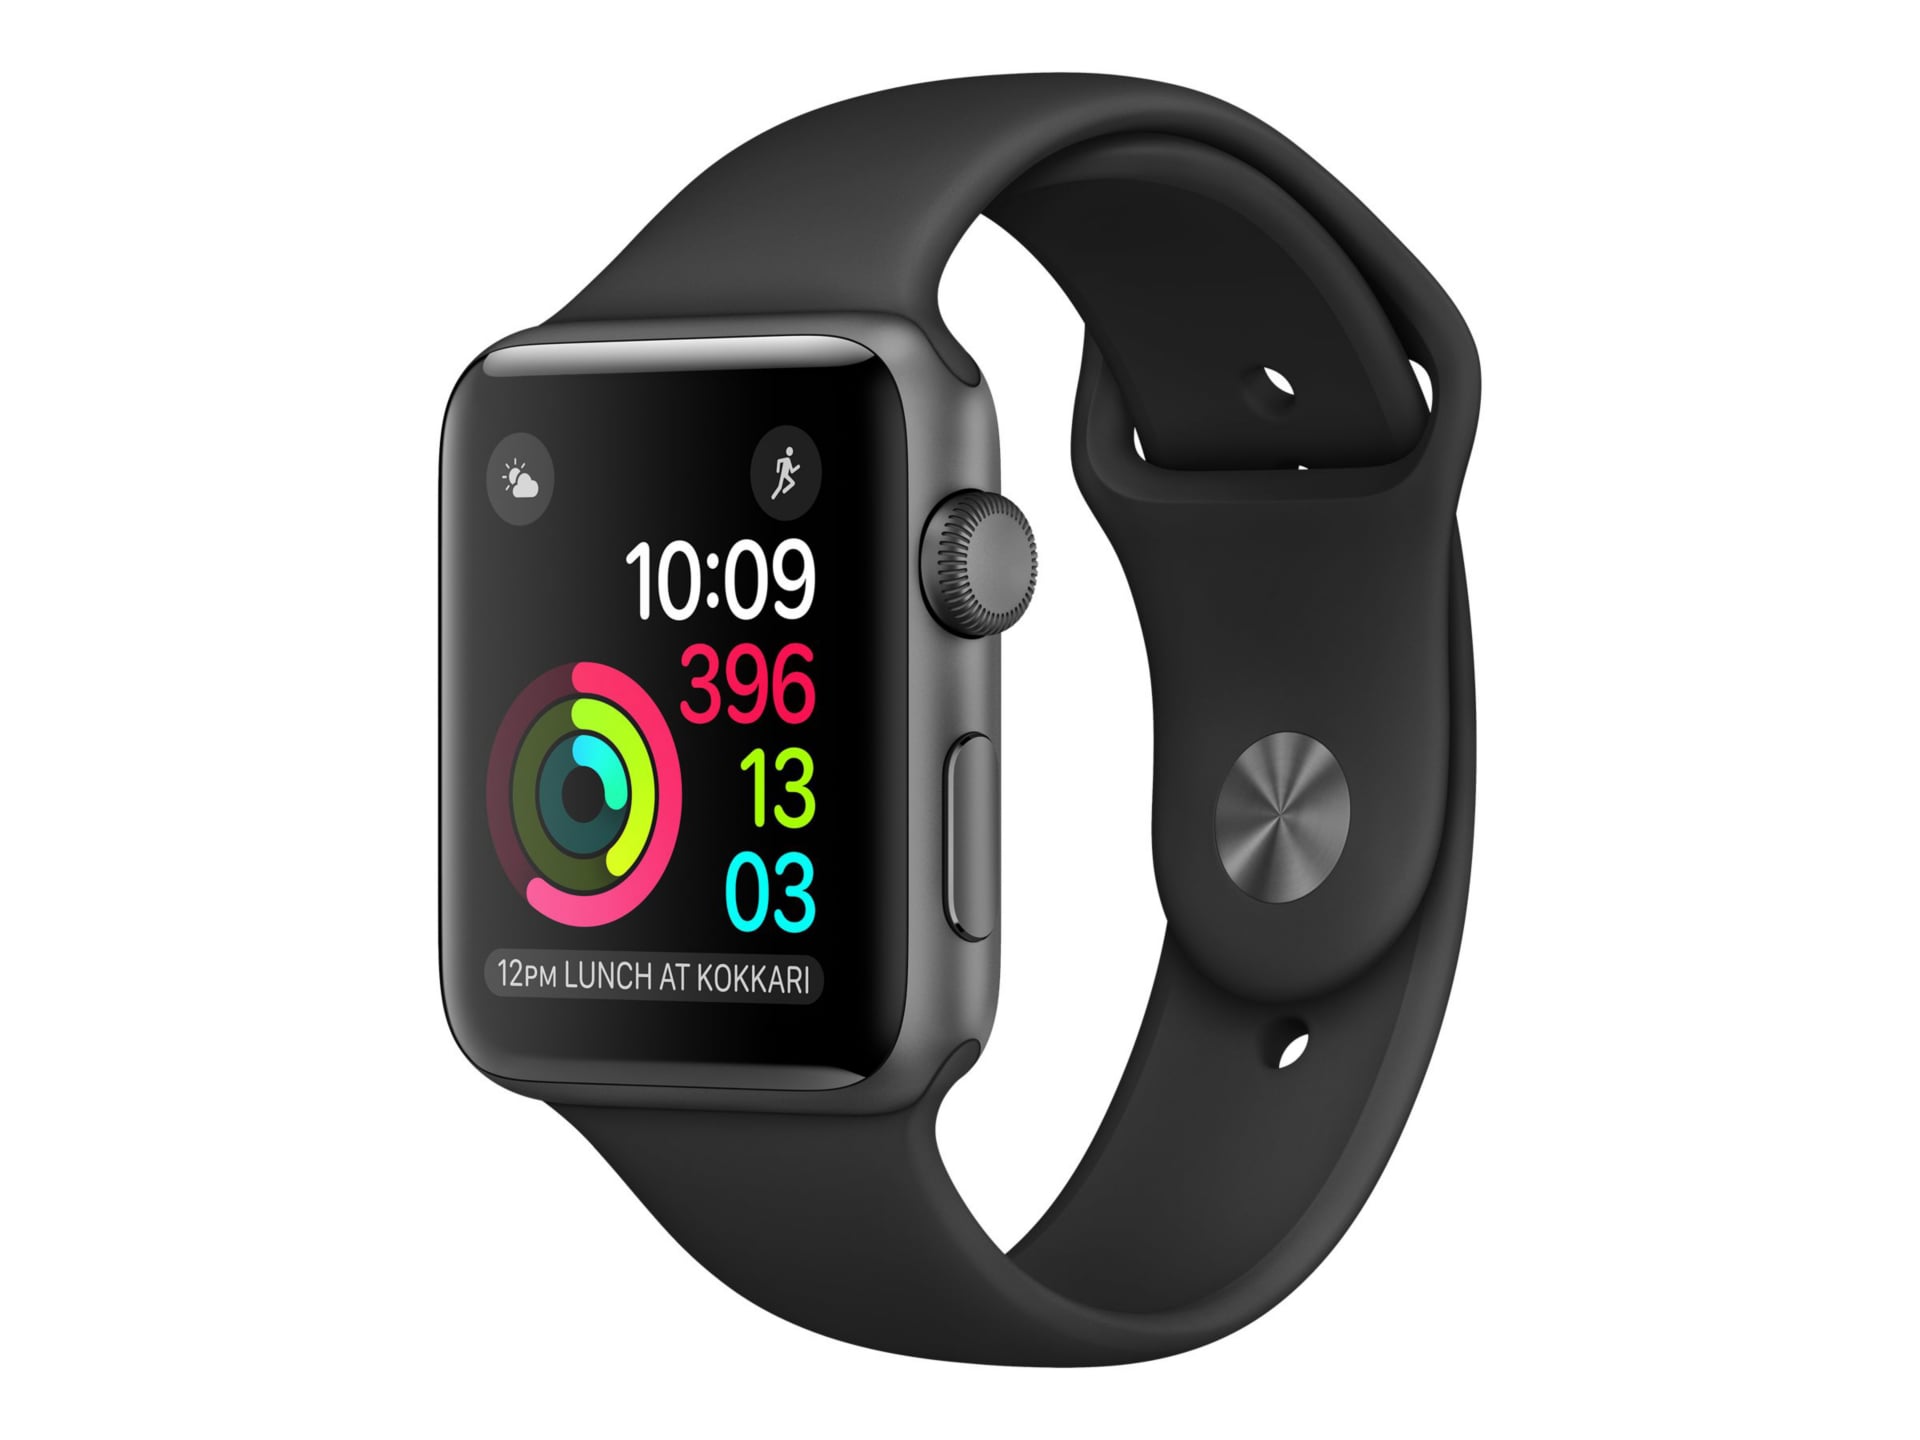 Apple Watch Series 1 - space gray aluminum - smart watch with sport band - black